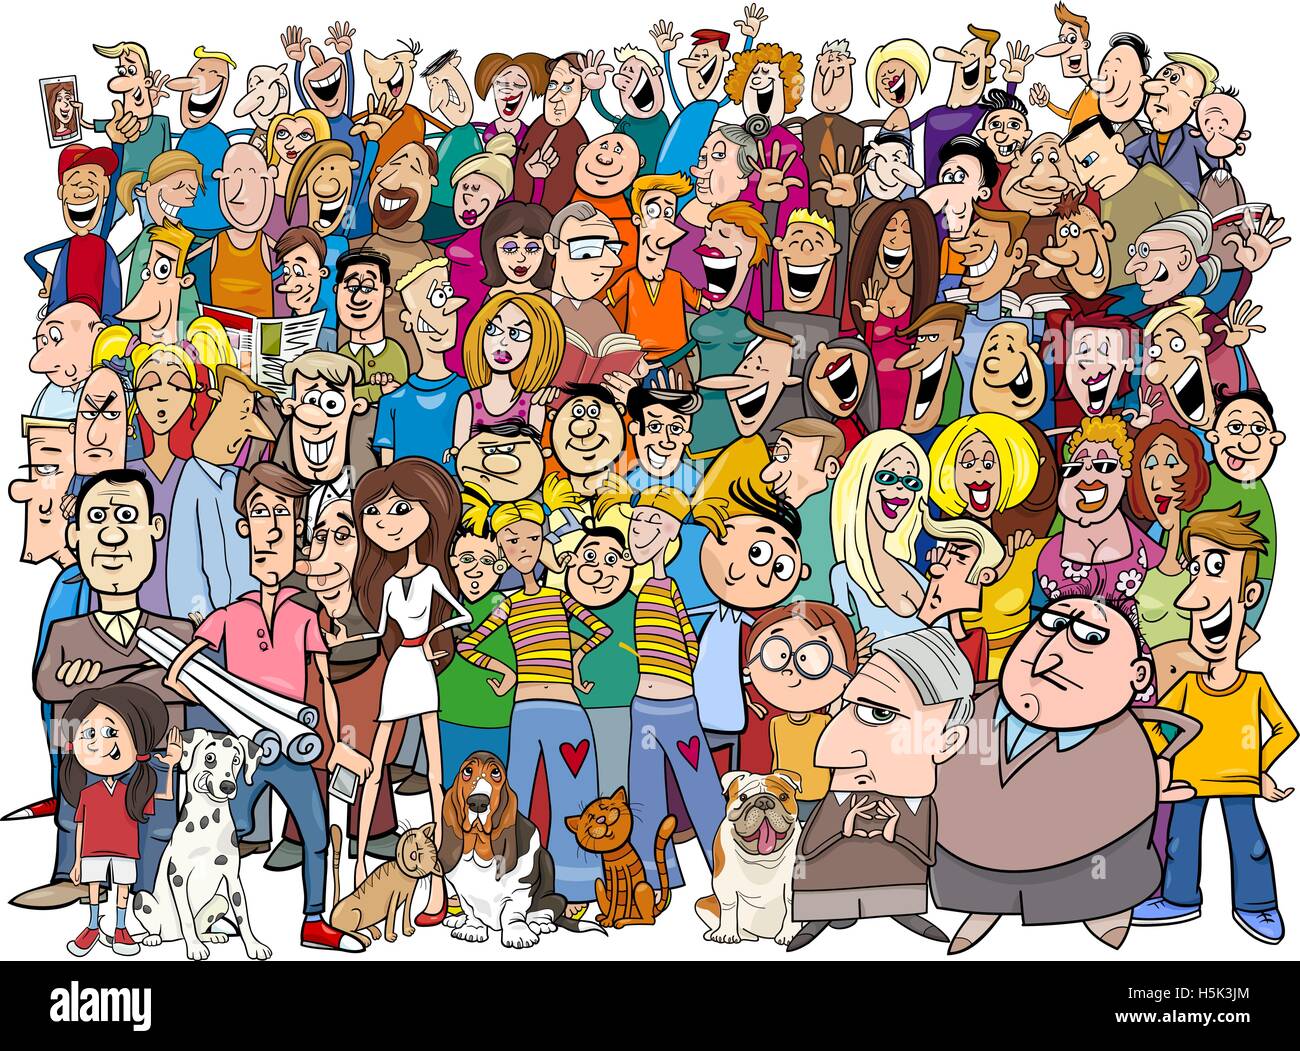 Cartoon Illustration of People Group in the Crowd Stock Vector